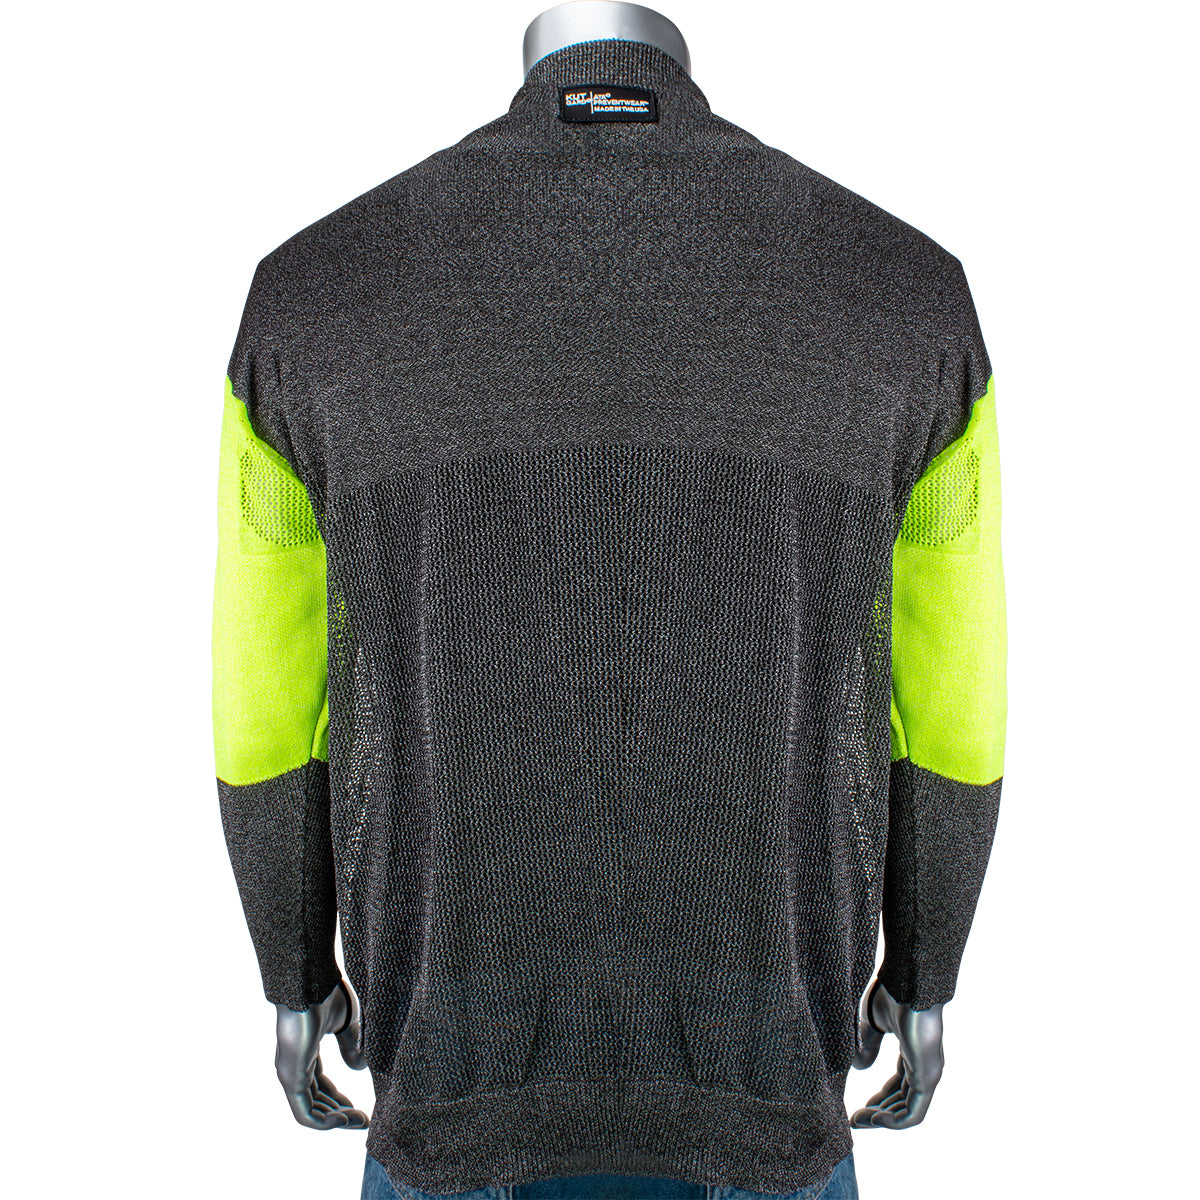 Kut Gard P190BP-PP1-TL-S ATA Blended Cut Resistant Pullover with Removable Belly Patch, Hi-Vis Sleeves and Thumb Loops